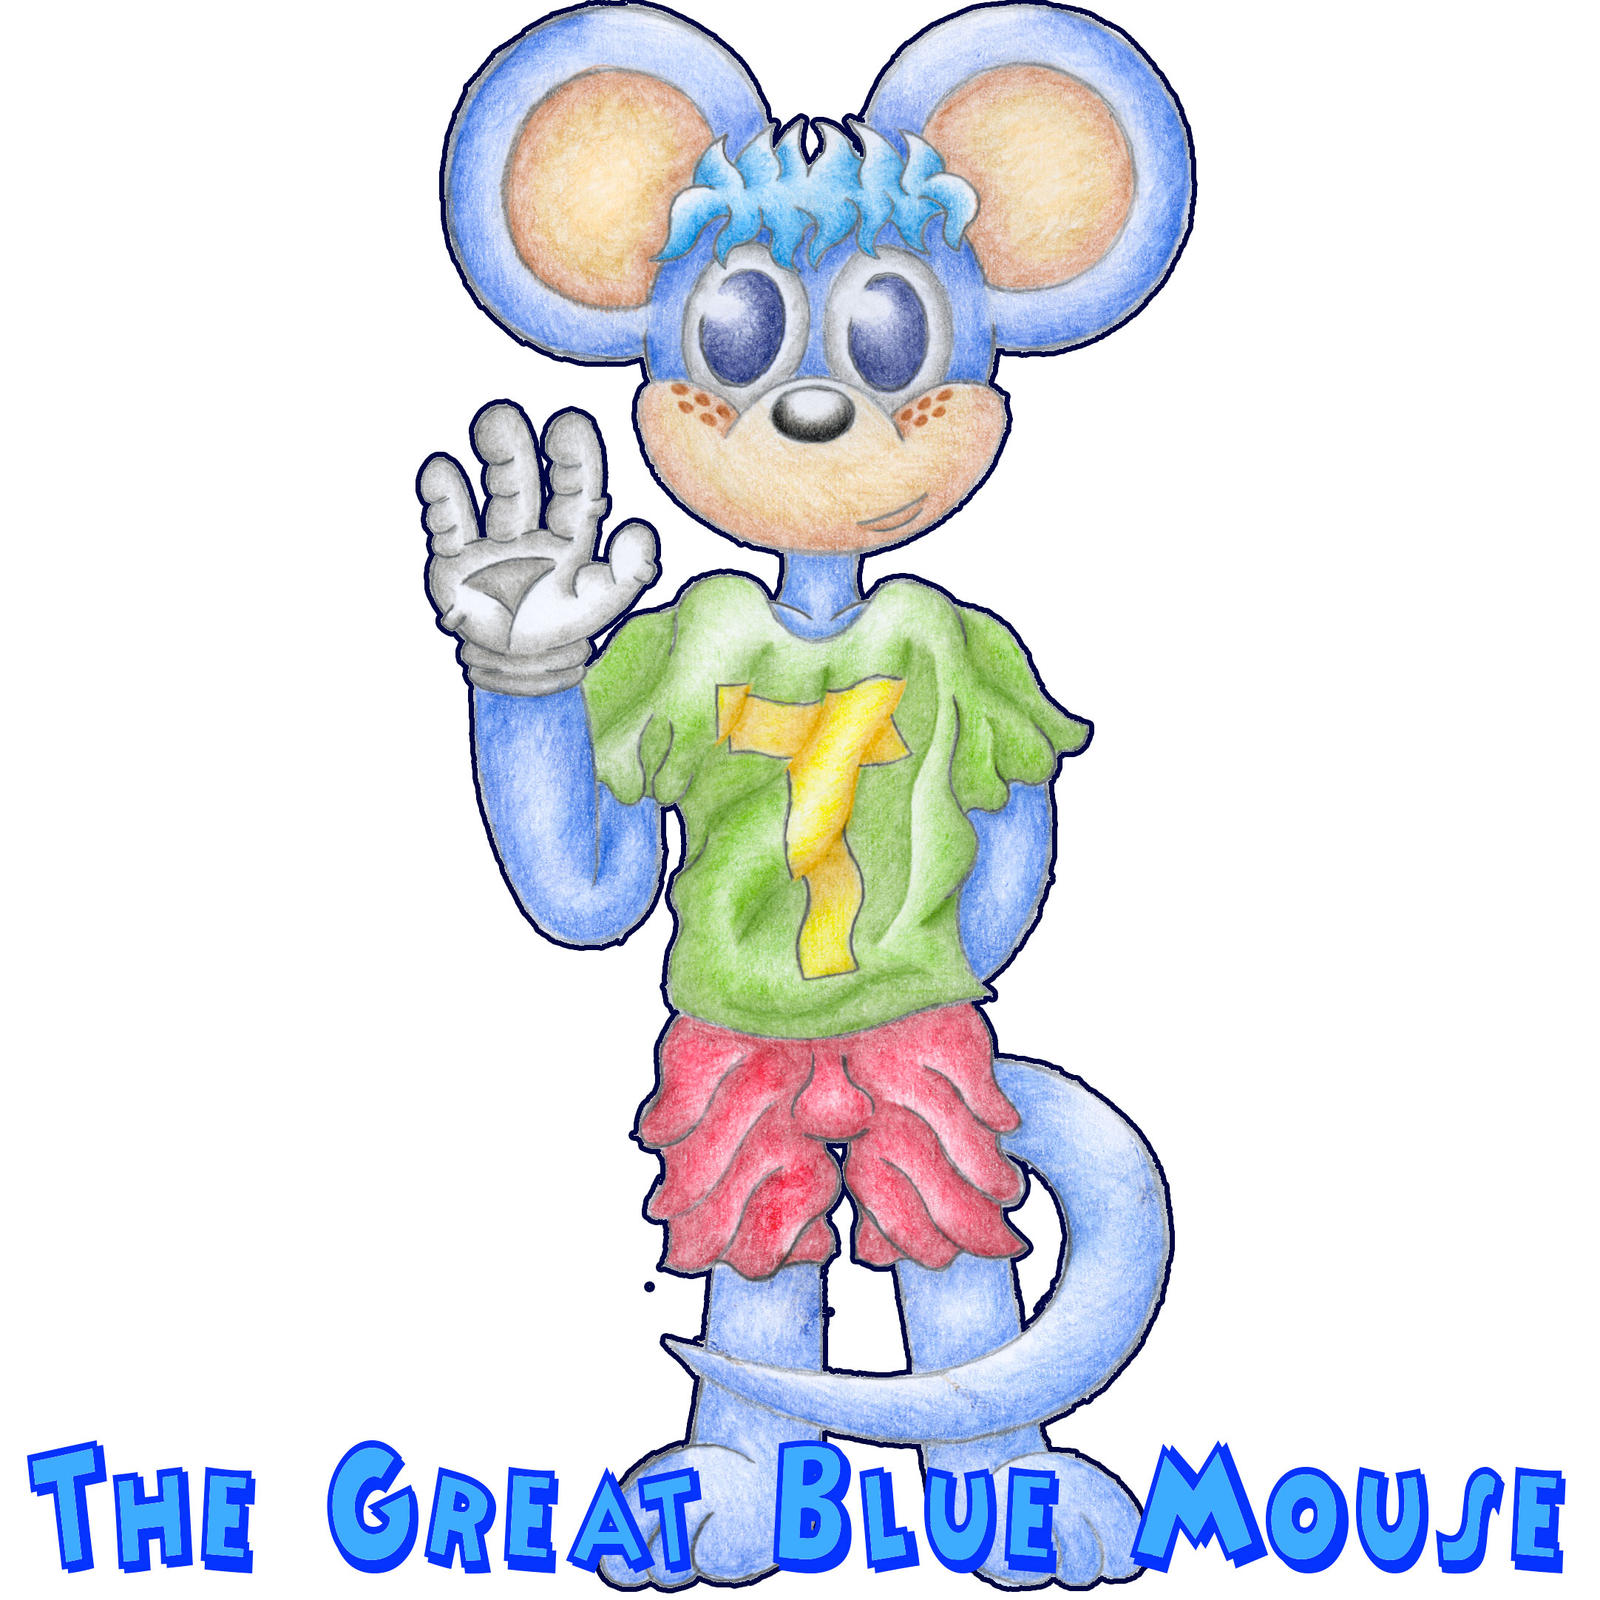 The Great Blue Mouse.